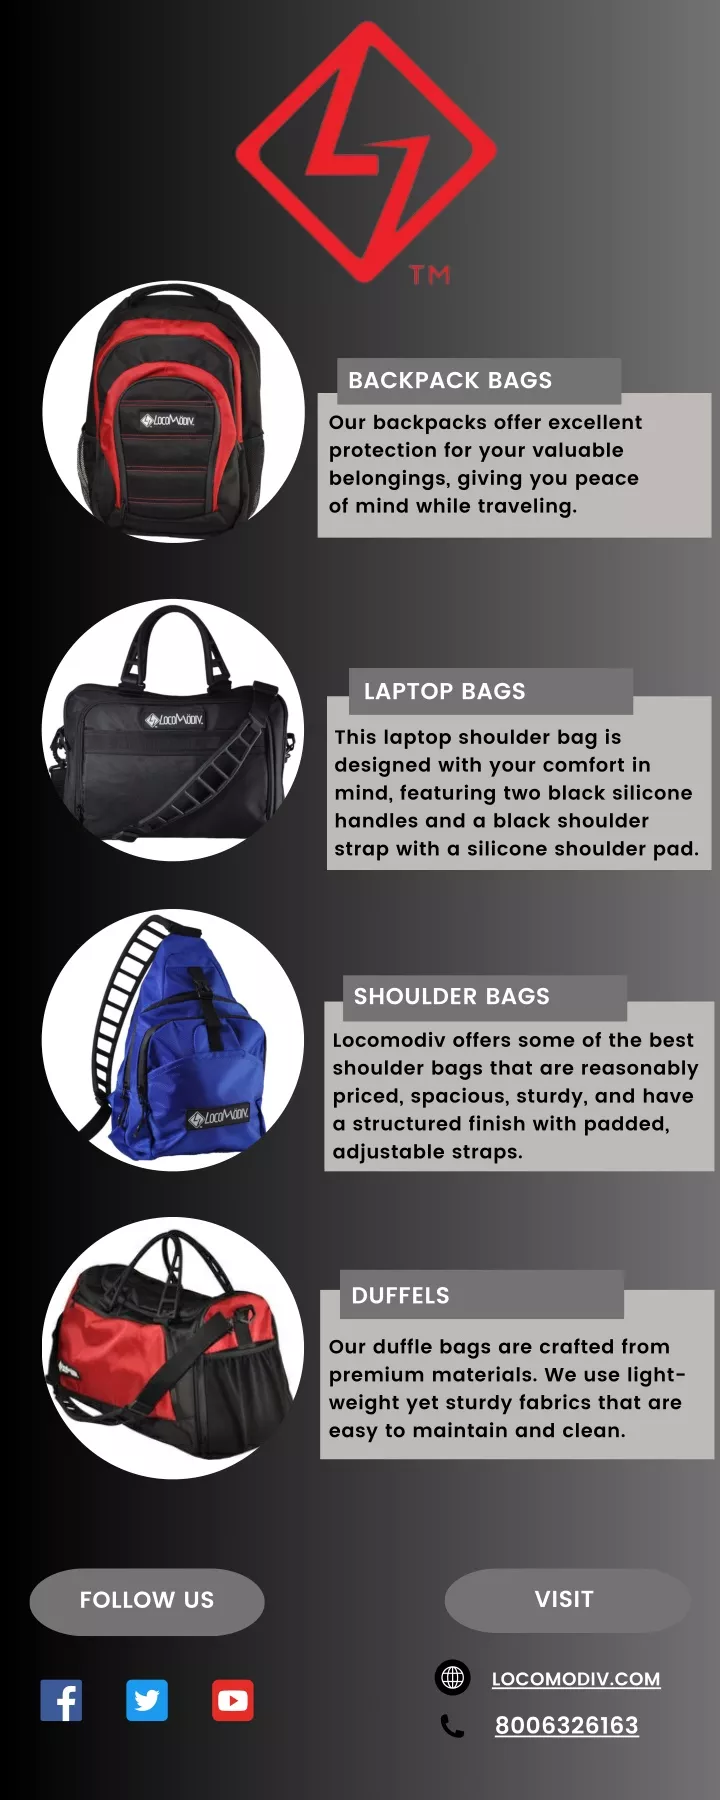 backpack bags our backpacks offer excellent